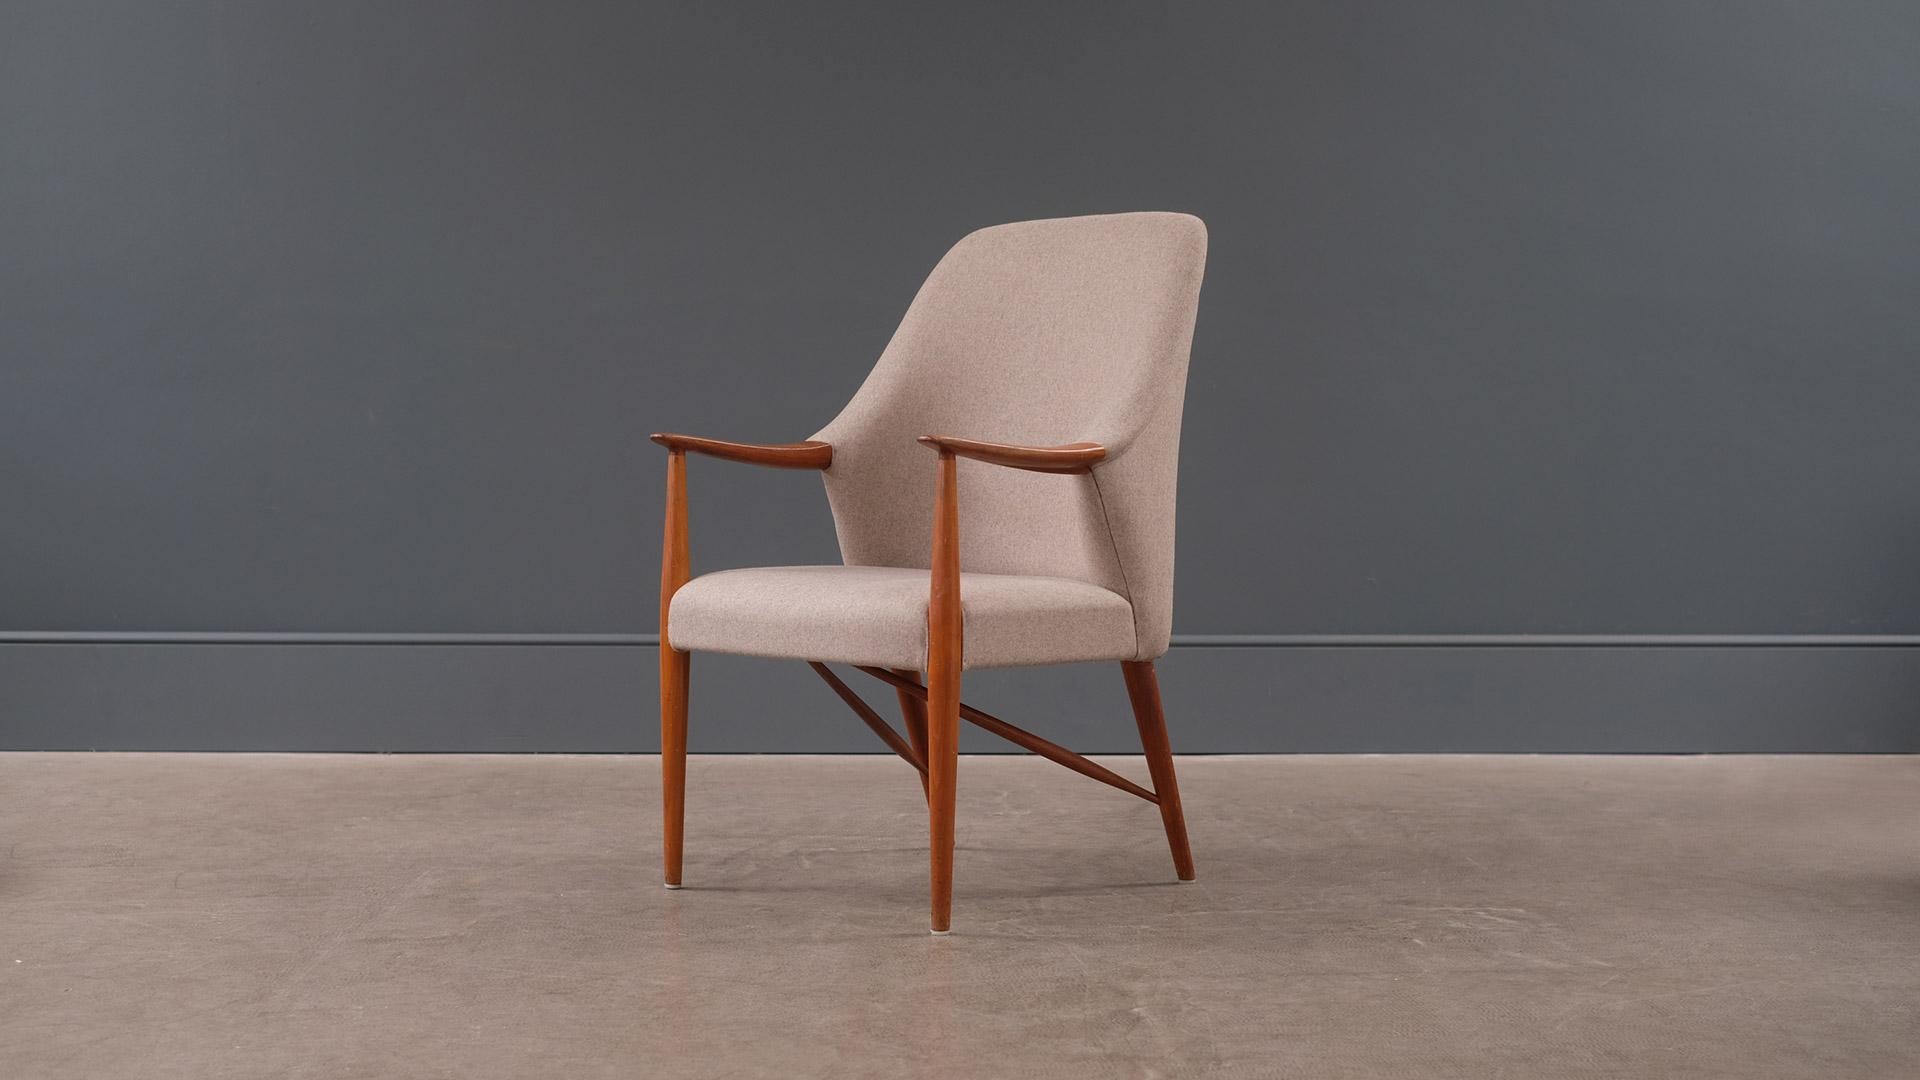 Rare and beautiful armchair designed by Danish Architects Hvidt & Molgaard for master cabinet maker A J Iversen. Solid sculptural teak frame fully refurbished and re-upholstered in greige wool fabric. Lovely chair.